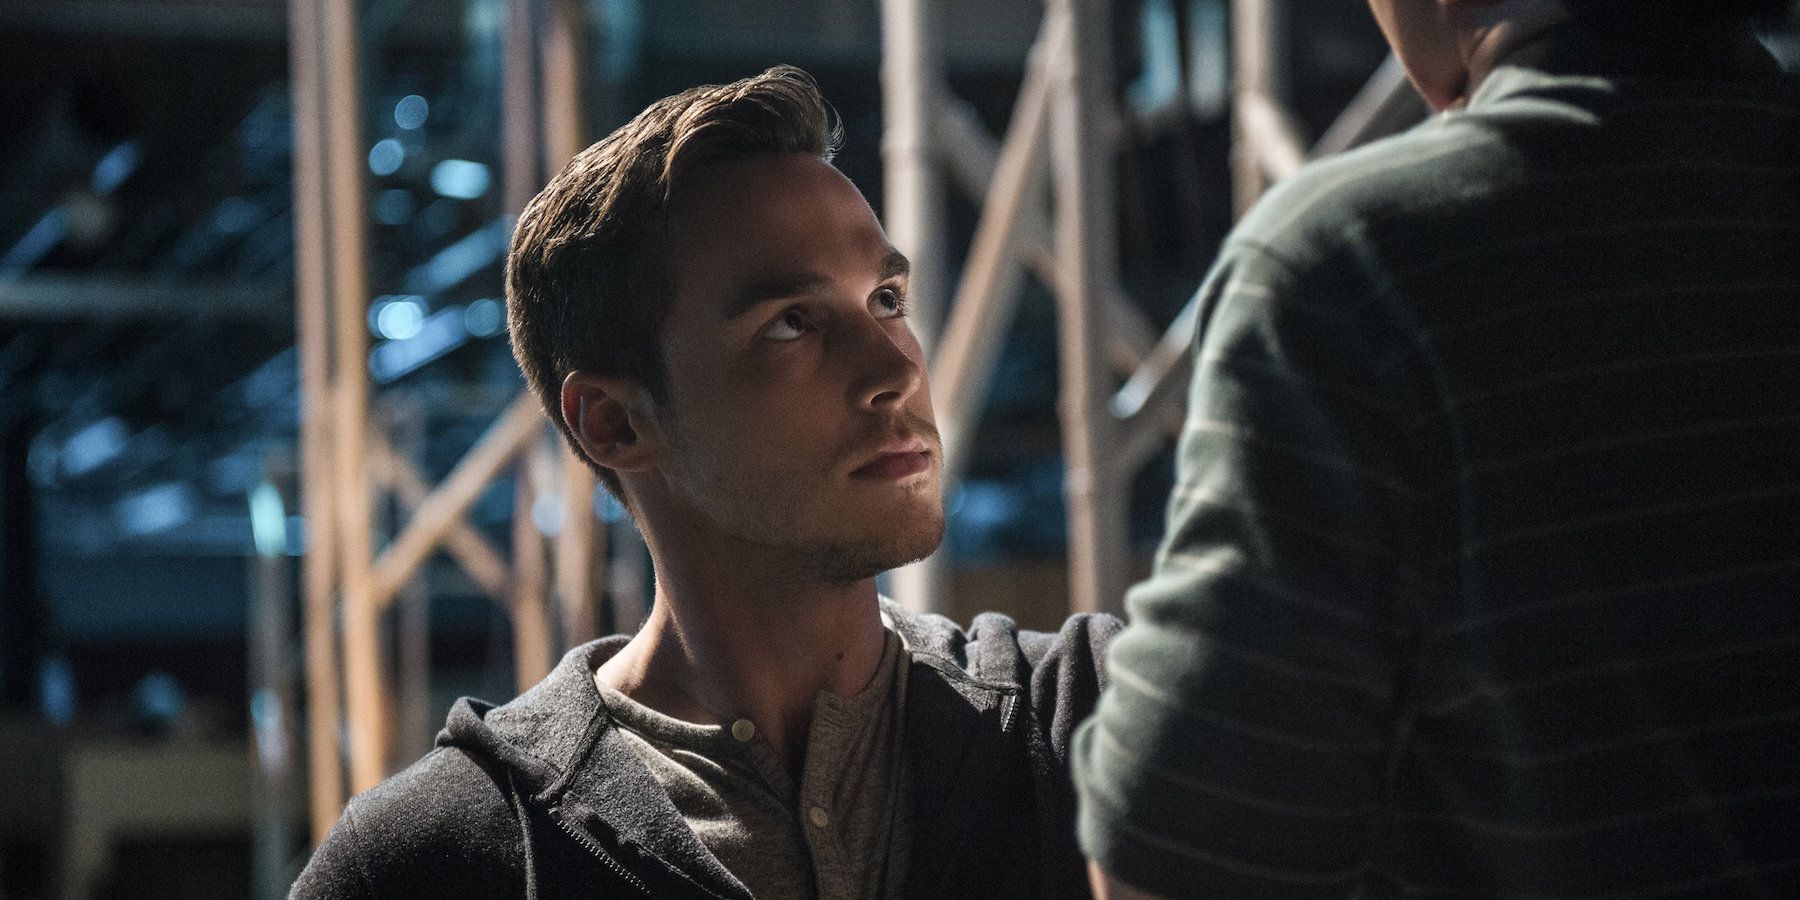 Supergirl Welcome to Earth Mon-El Chris Wood